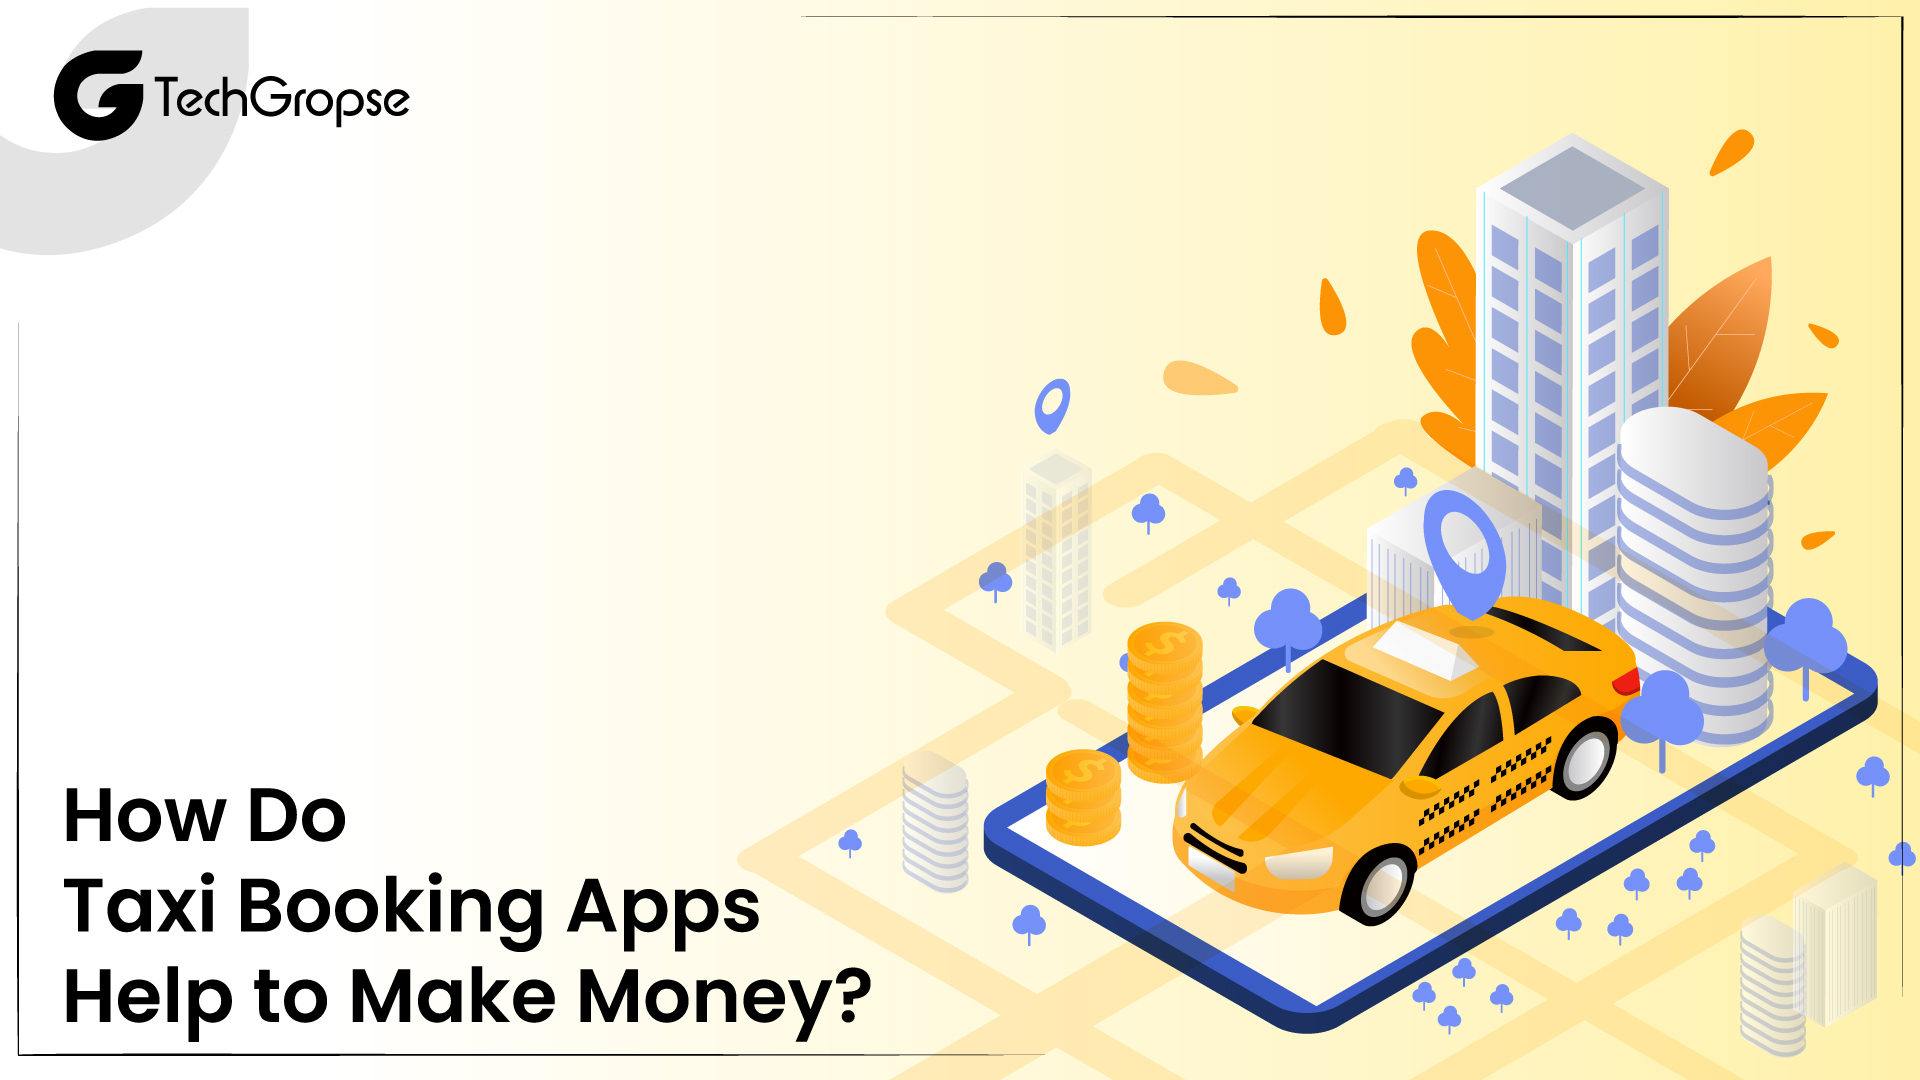 How Do Taxi Booking Apps Help to Make Money?